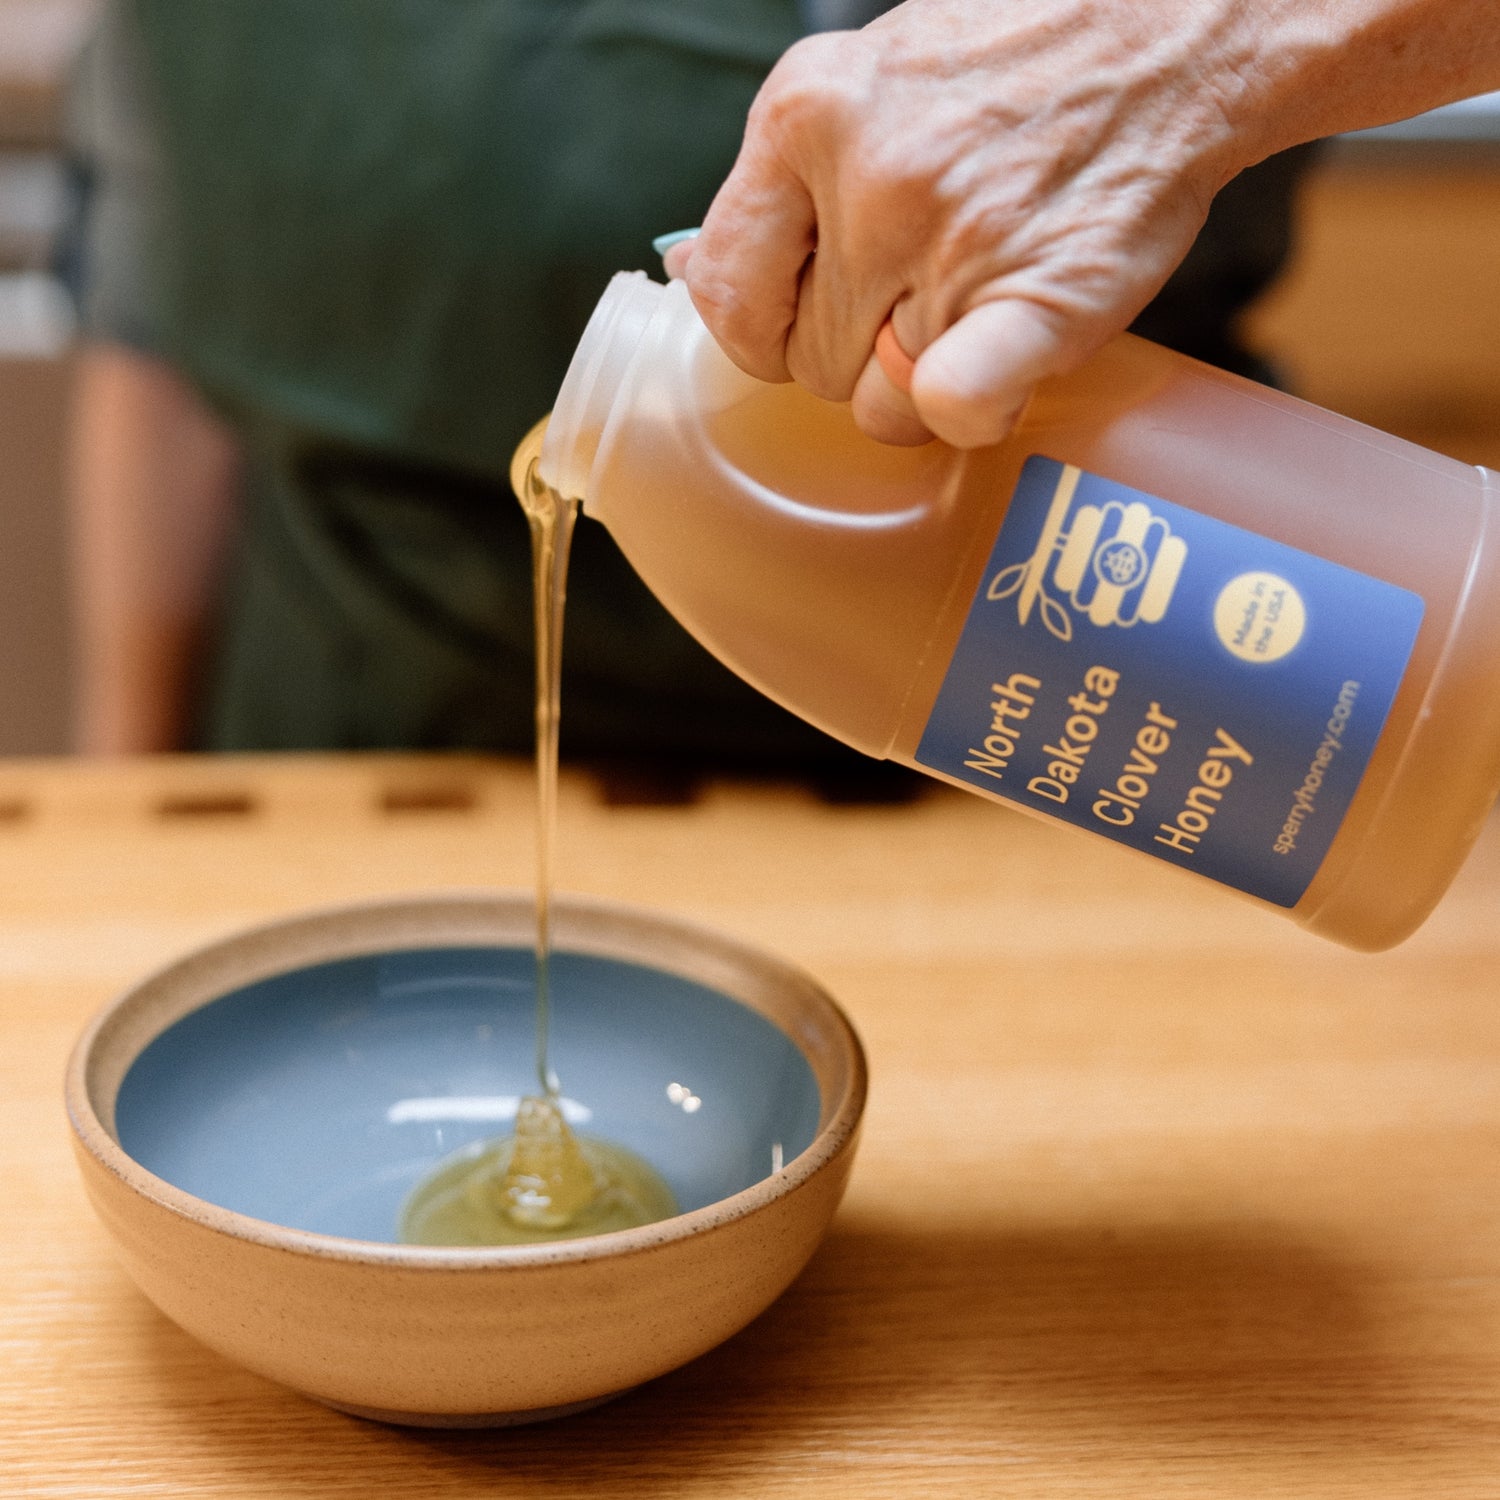 A bottle of gluten free honey being poured into a bowl.